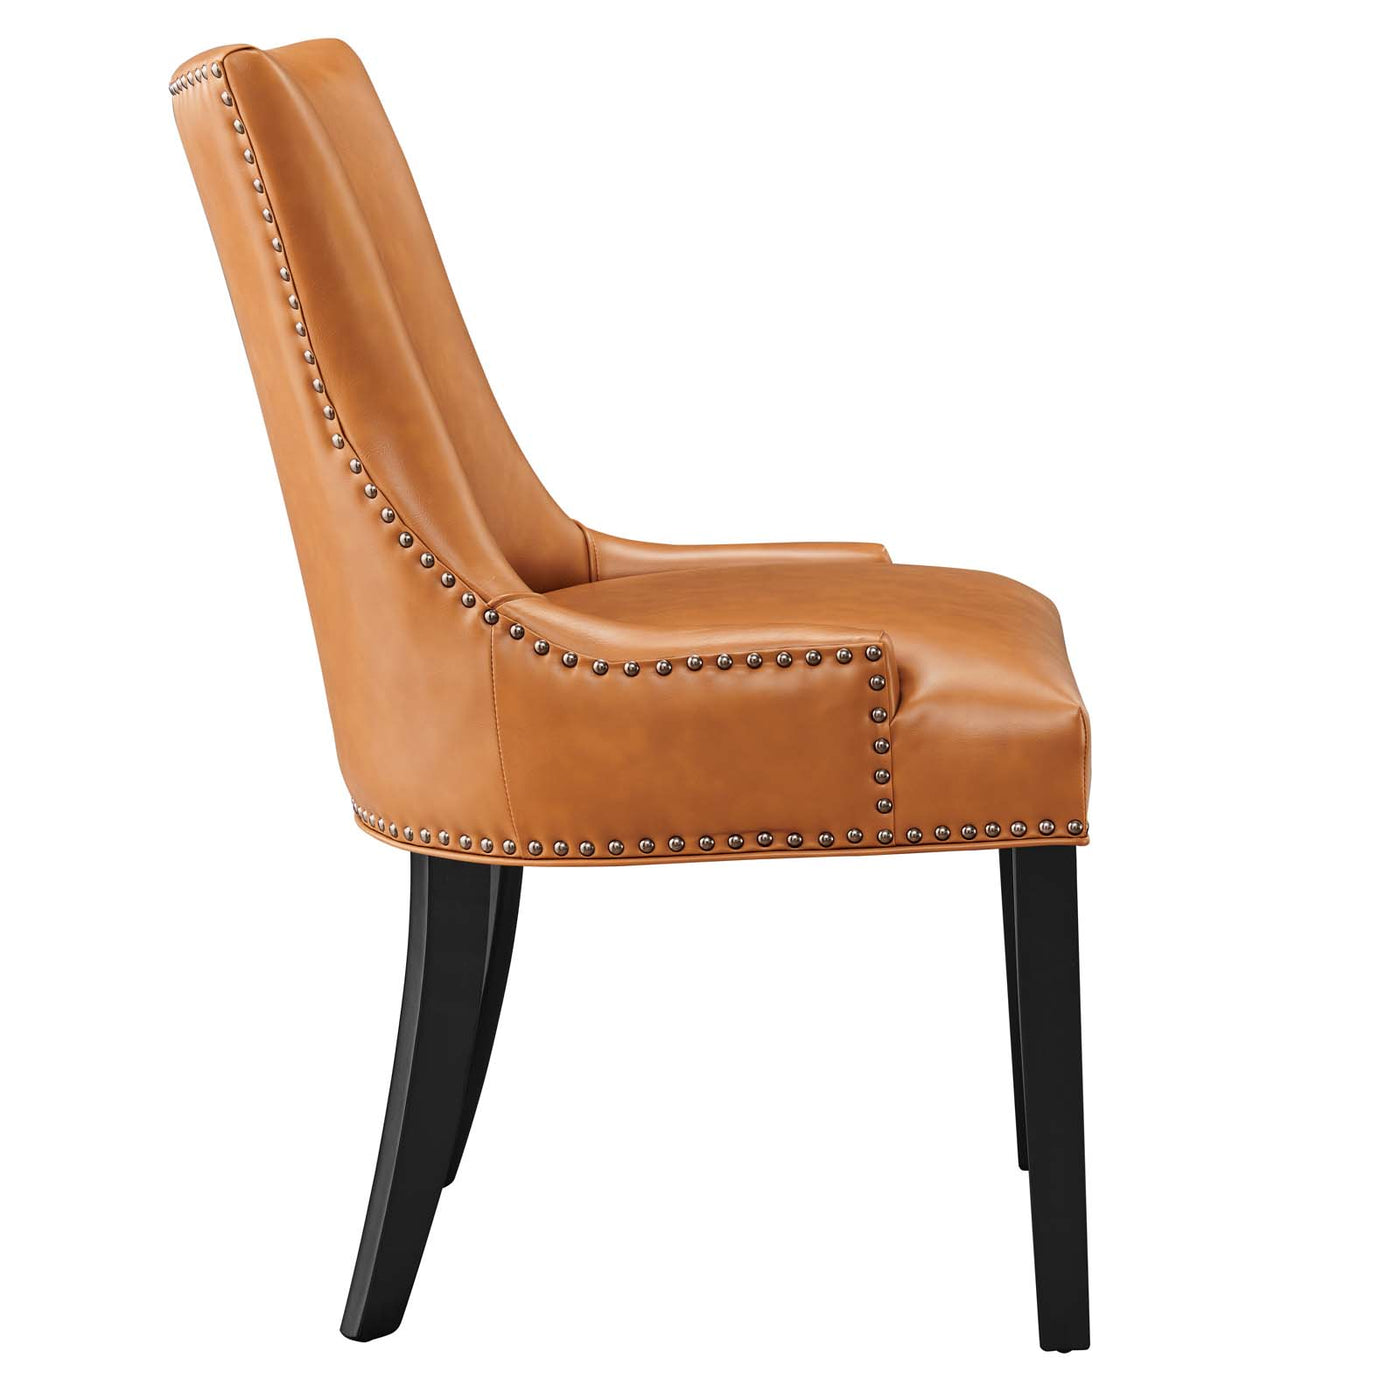 Marquis Vegan Leather Dining Chair